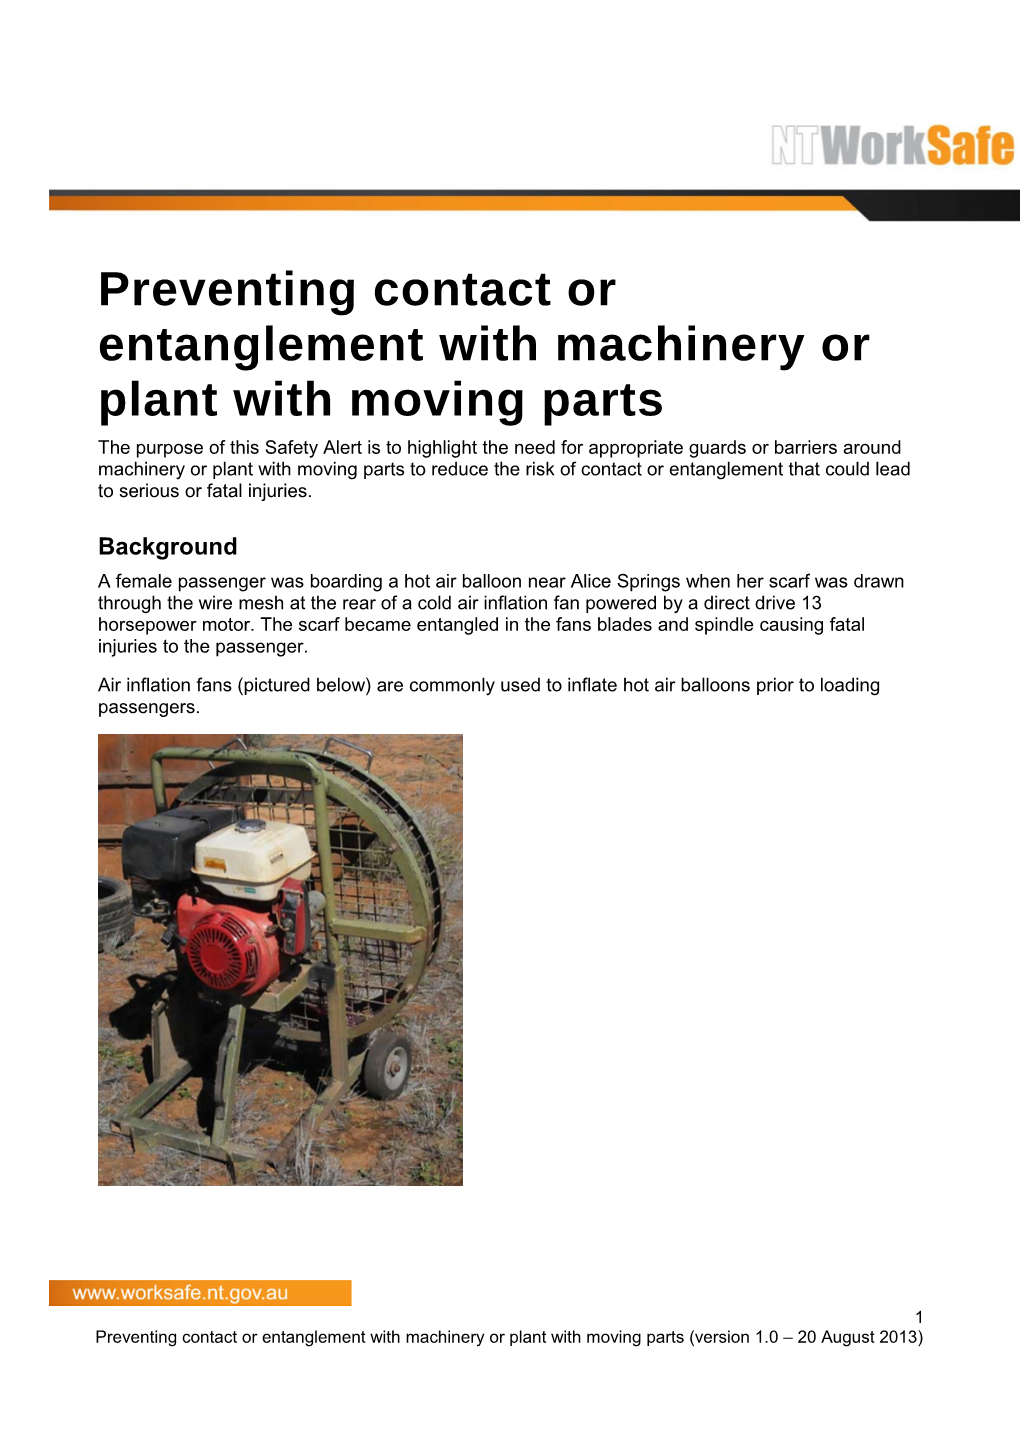 Safety Alert - Preventing Contact Or Entanglement with Machinery Or Plant with Moving Parts